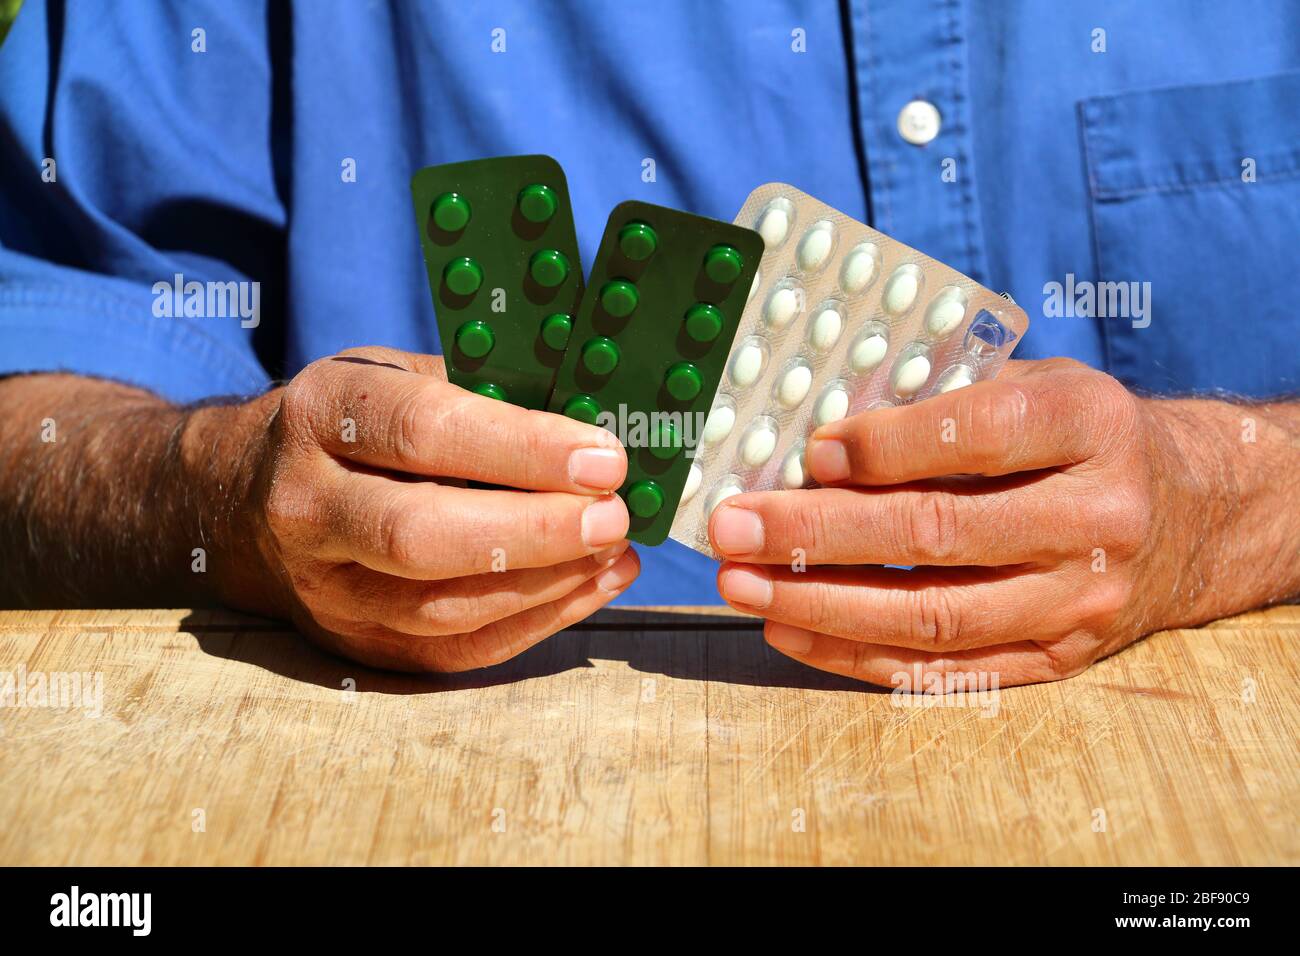 Man with a blue shirt holding pills and tablets Stock Photo